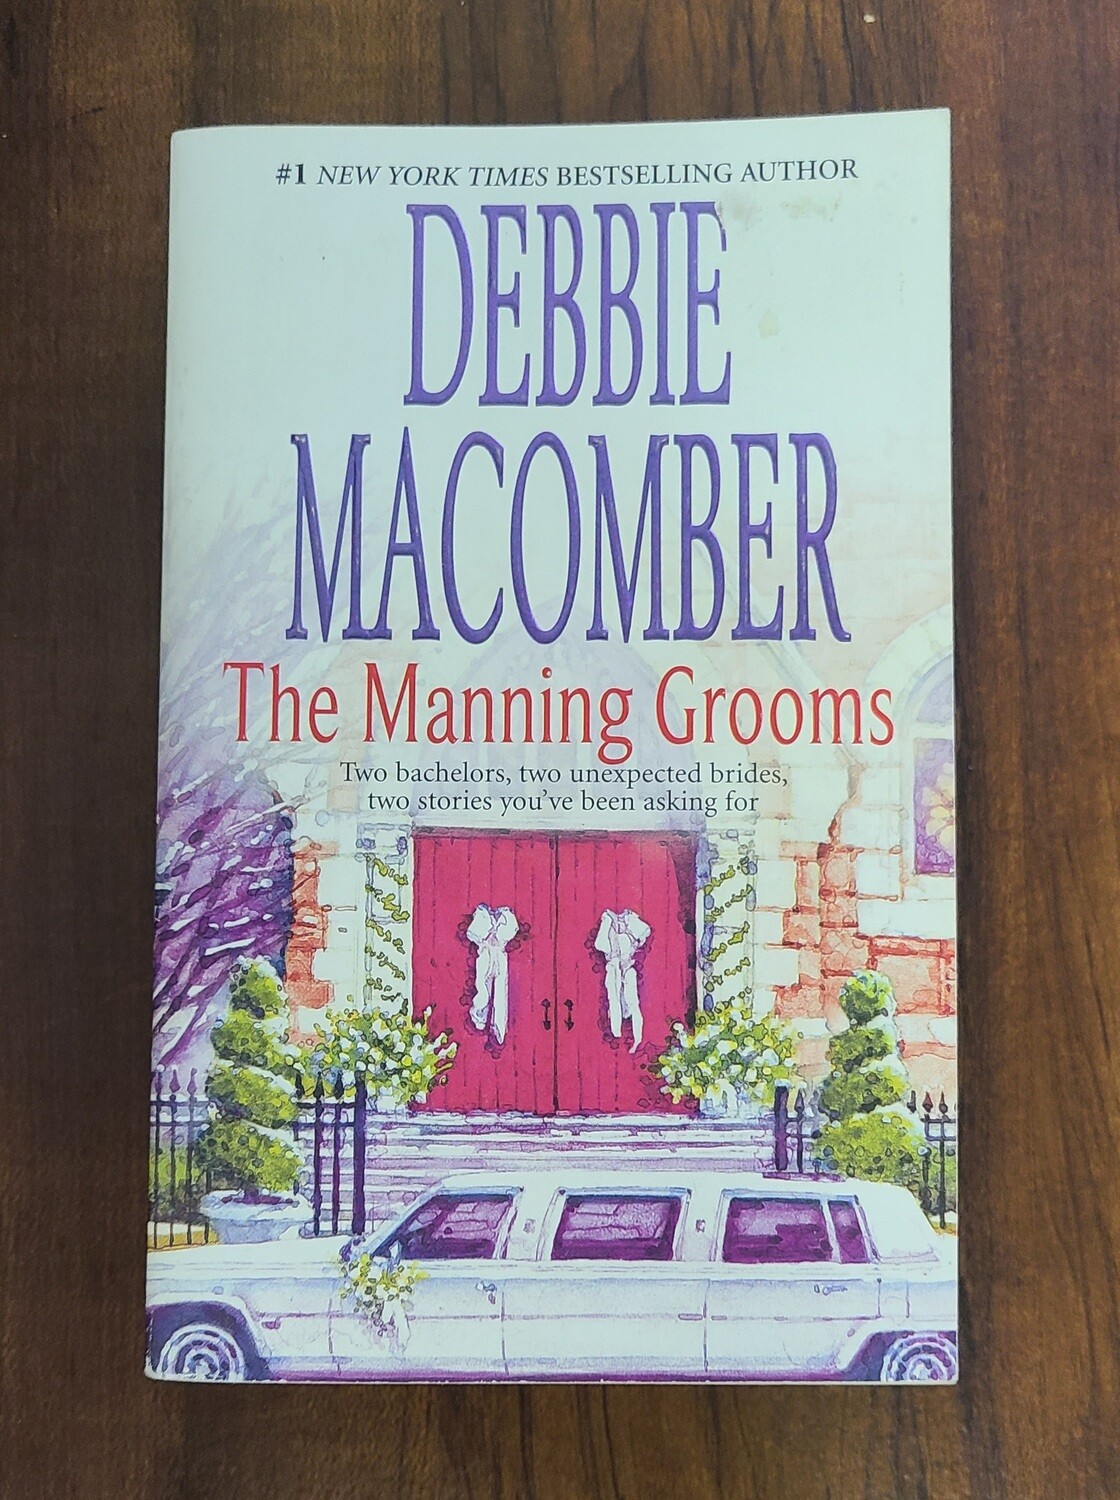 The Manning Grooms by Debbie Macomber